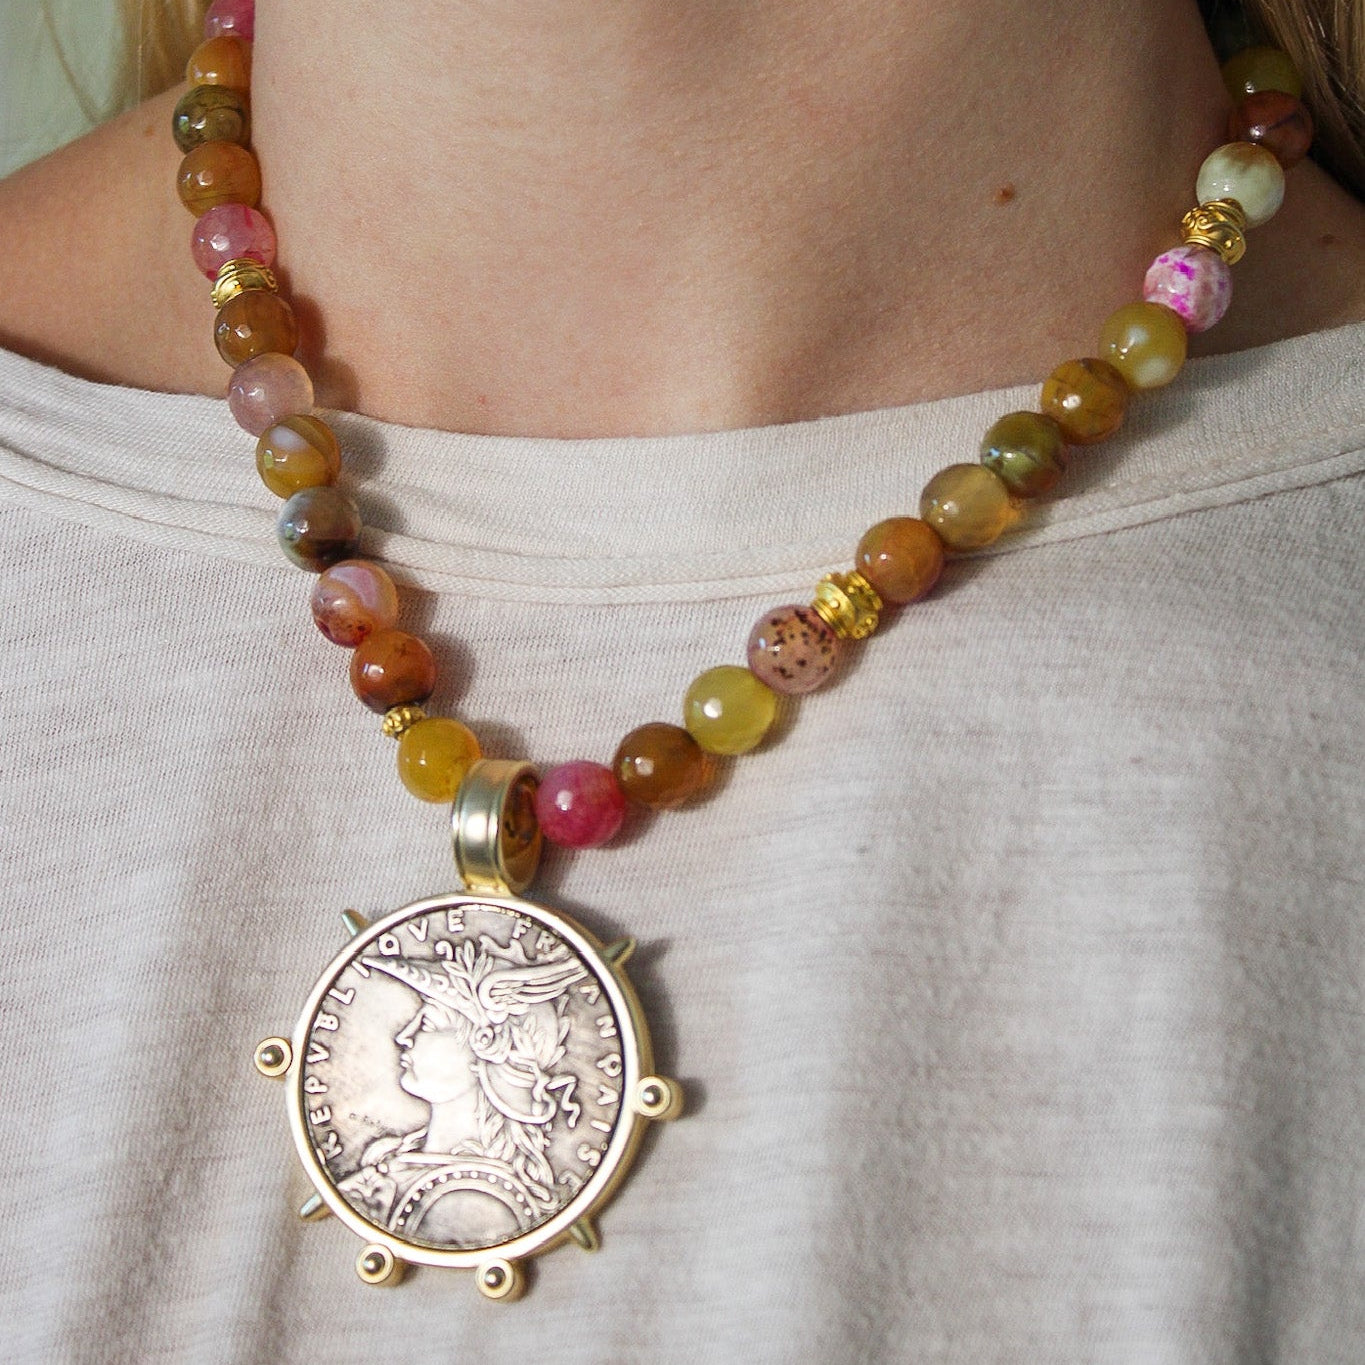 Mulit-Colored Agate and French Madagascar Pendant NecklaceBella Smith DesignsNecklace